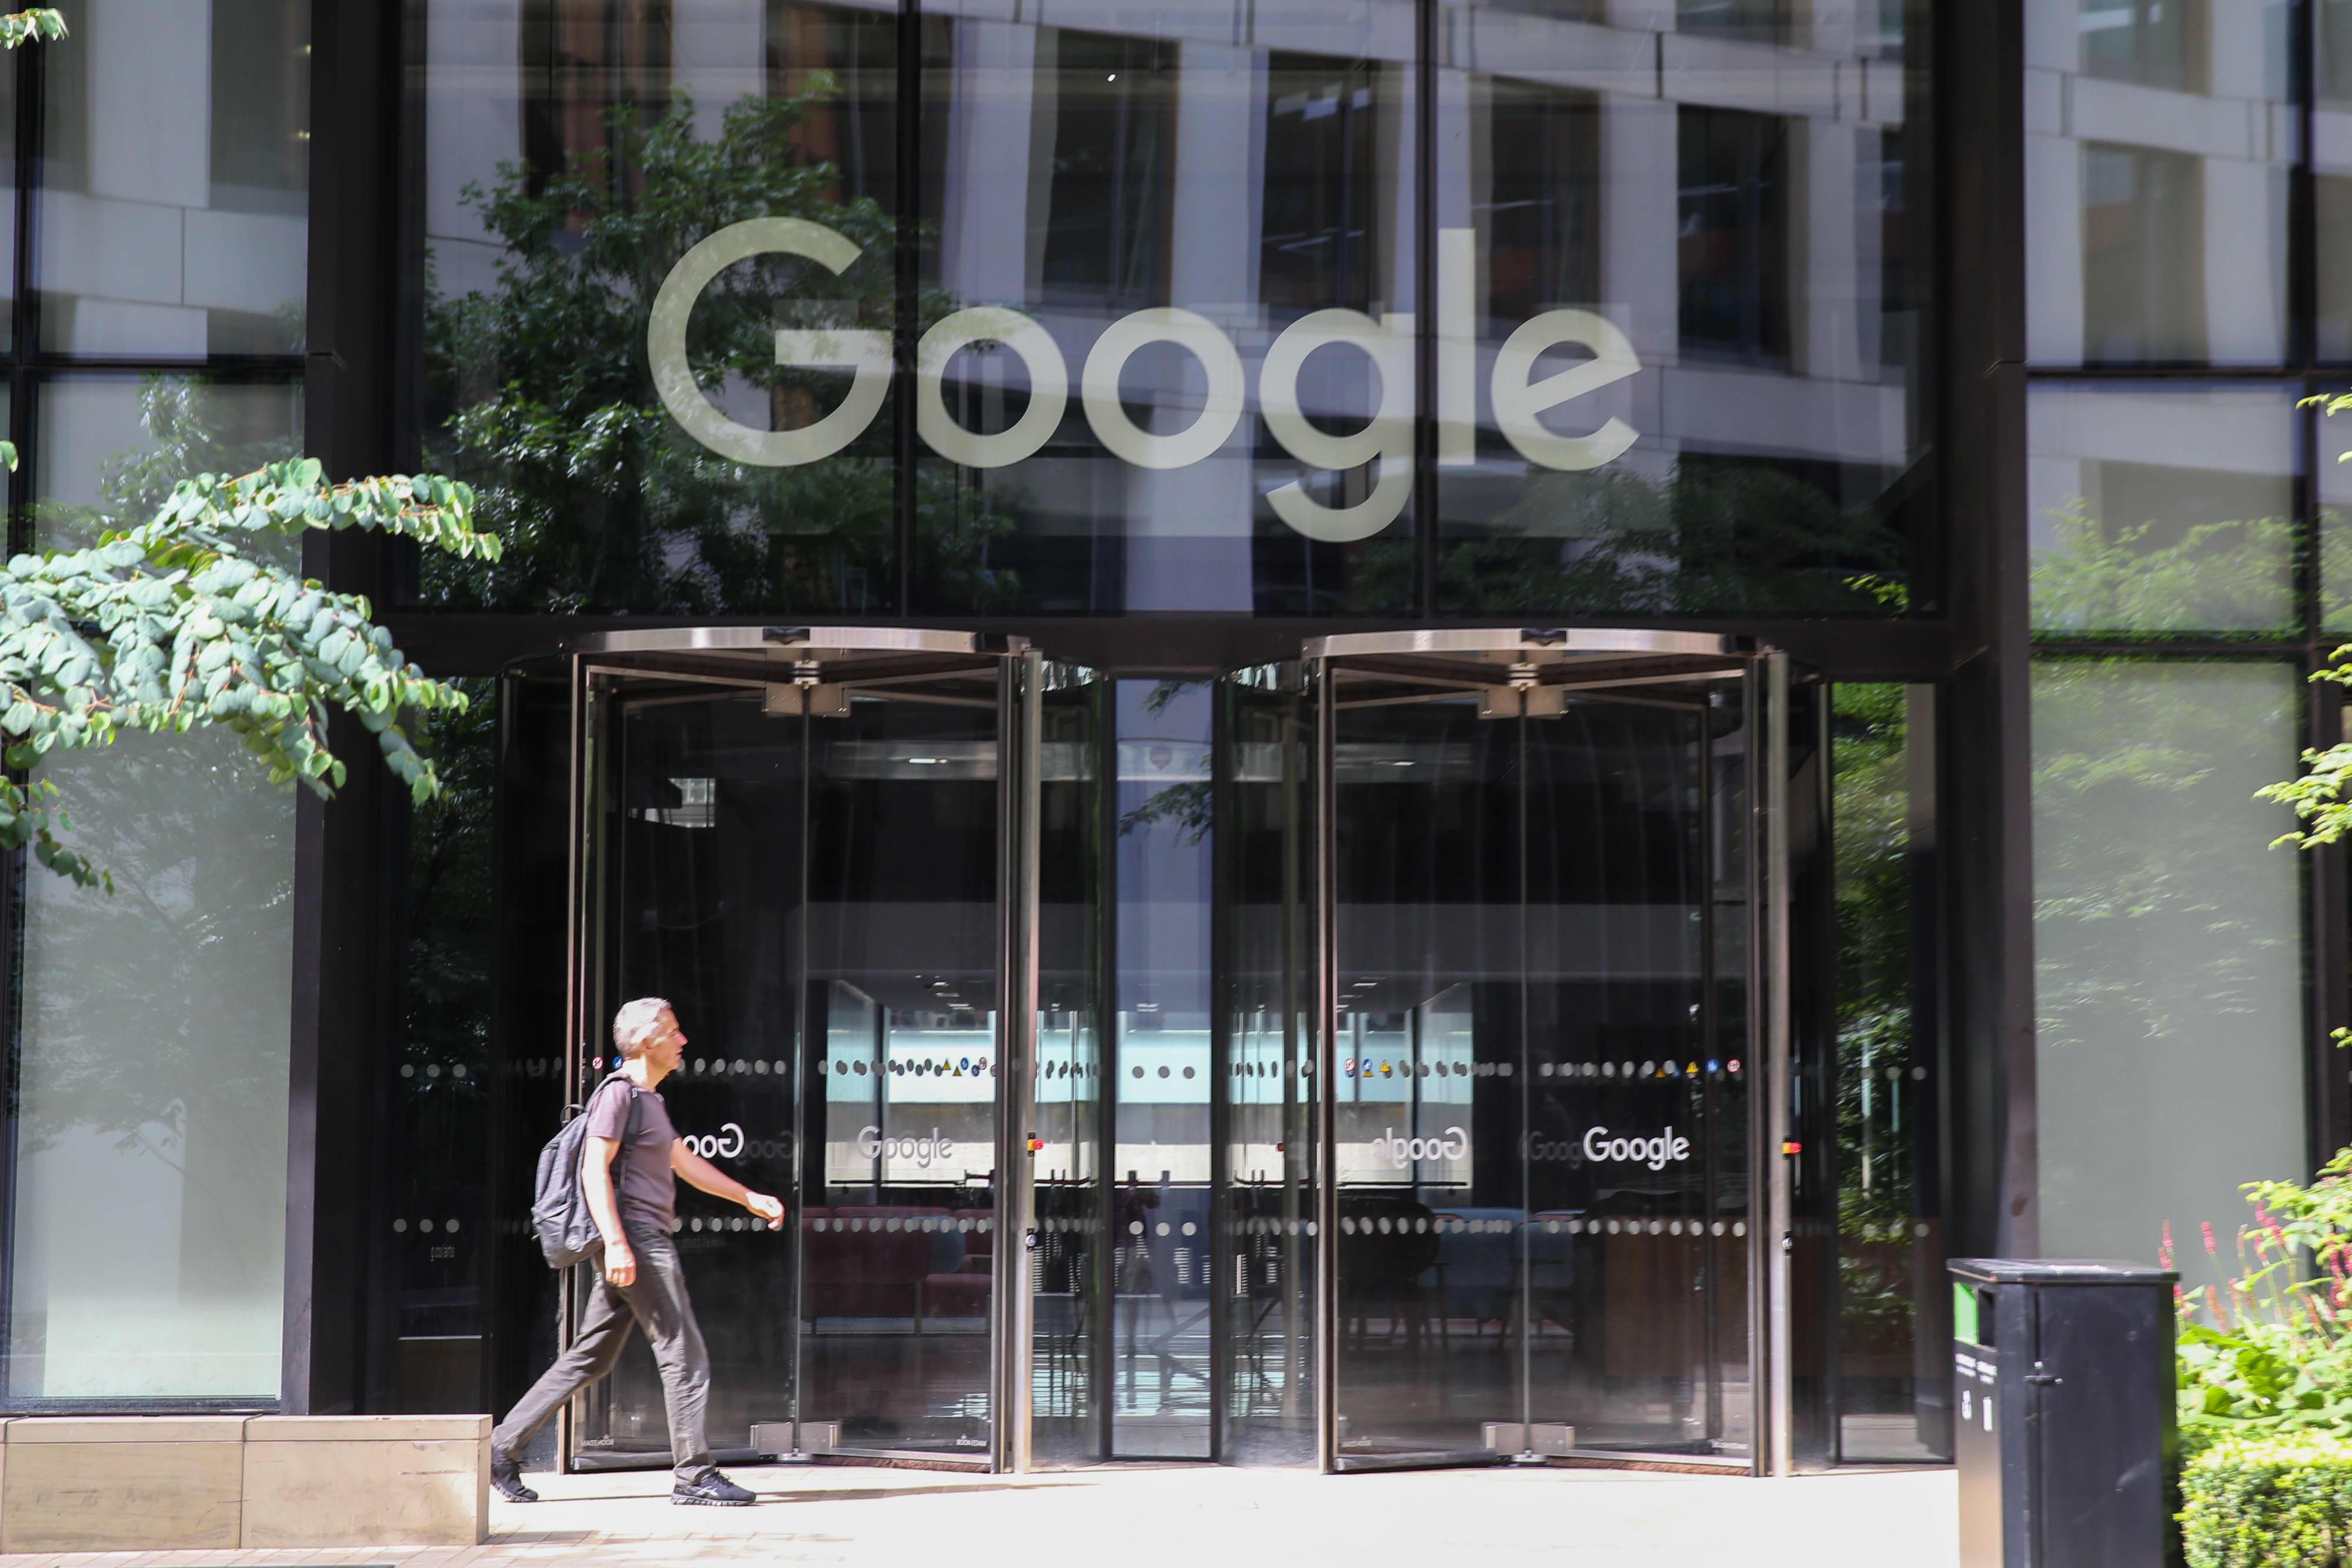 Some big tech companies are becoming less attractive places to work